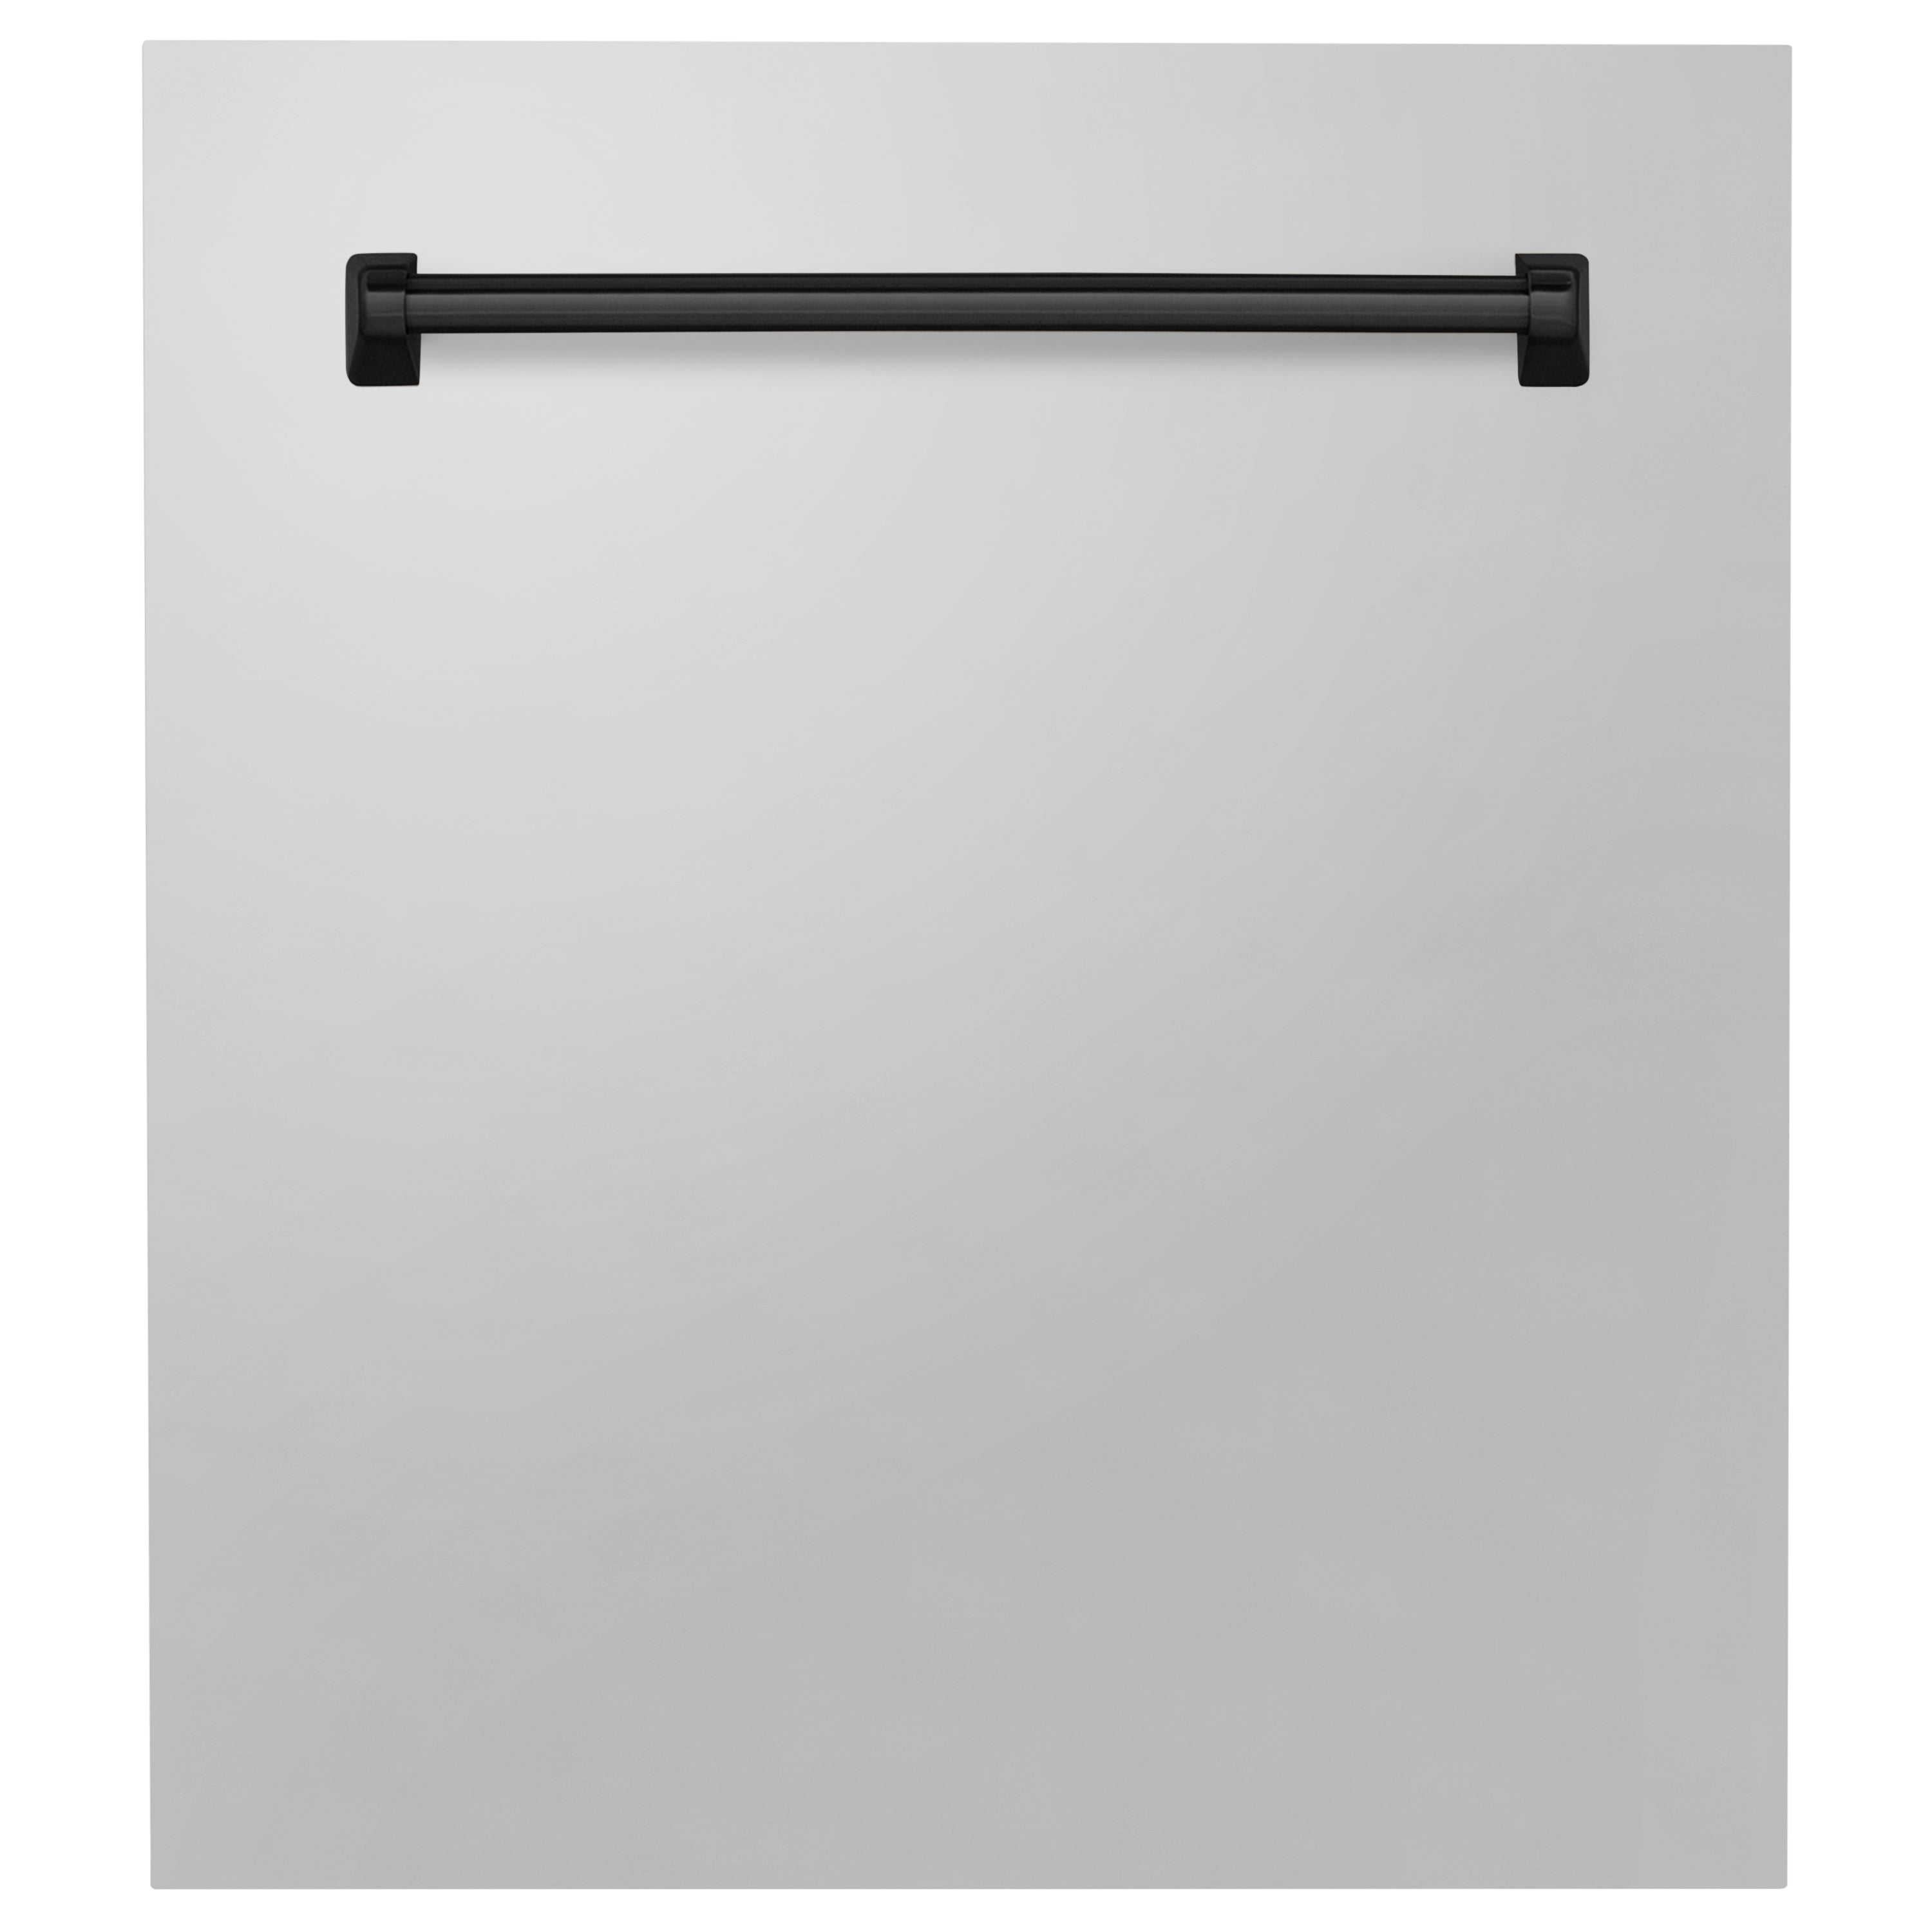 ZLINE 24" Autograph Edition Tallac Dishwasher Panel in Stainless Steel with Matte Black Handle (DPVZ-304-24-MB)